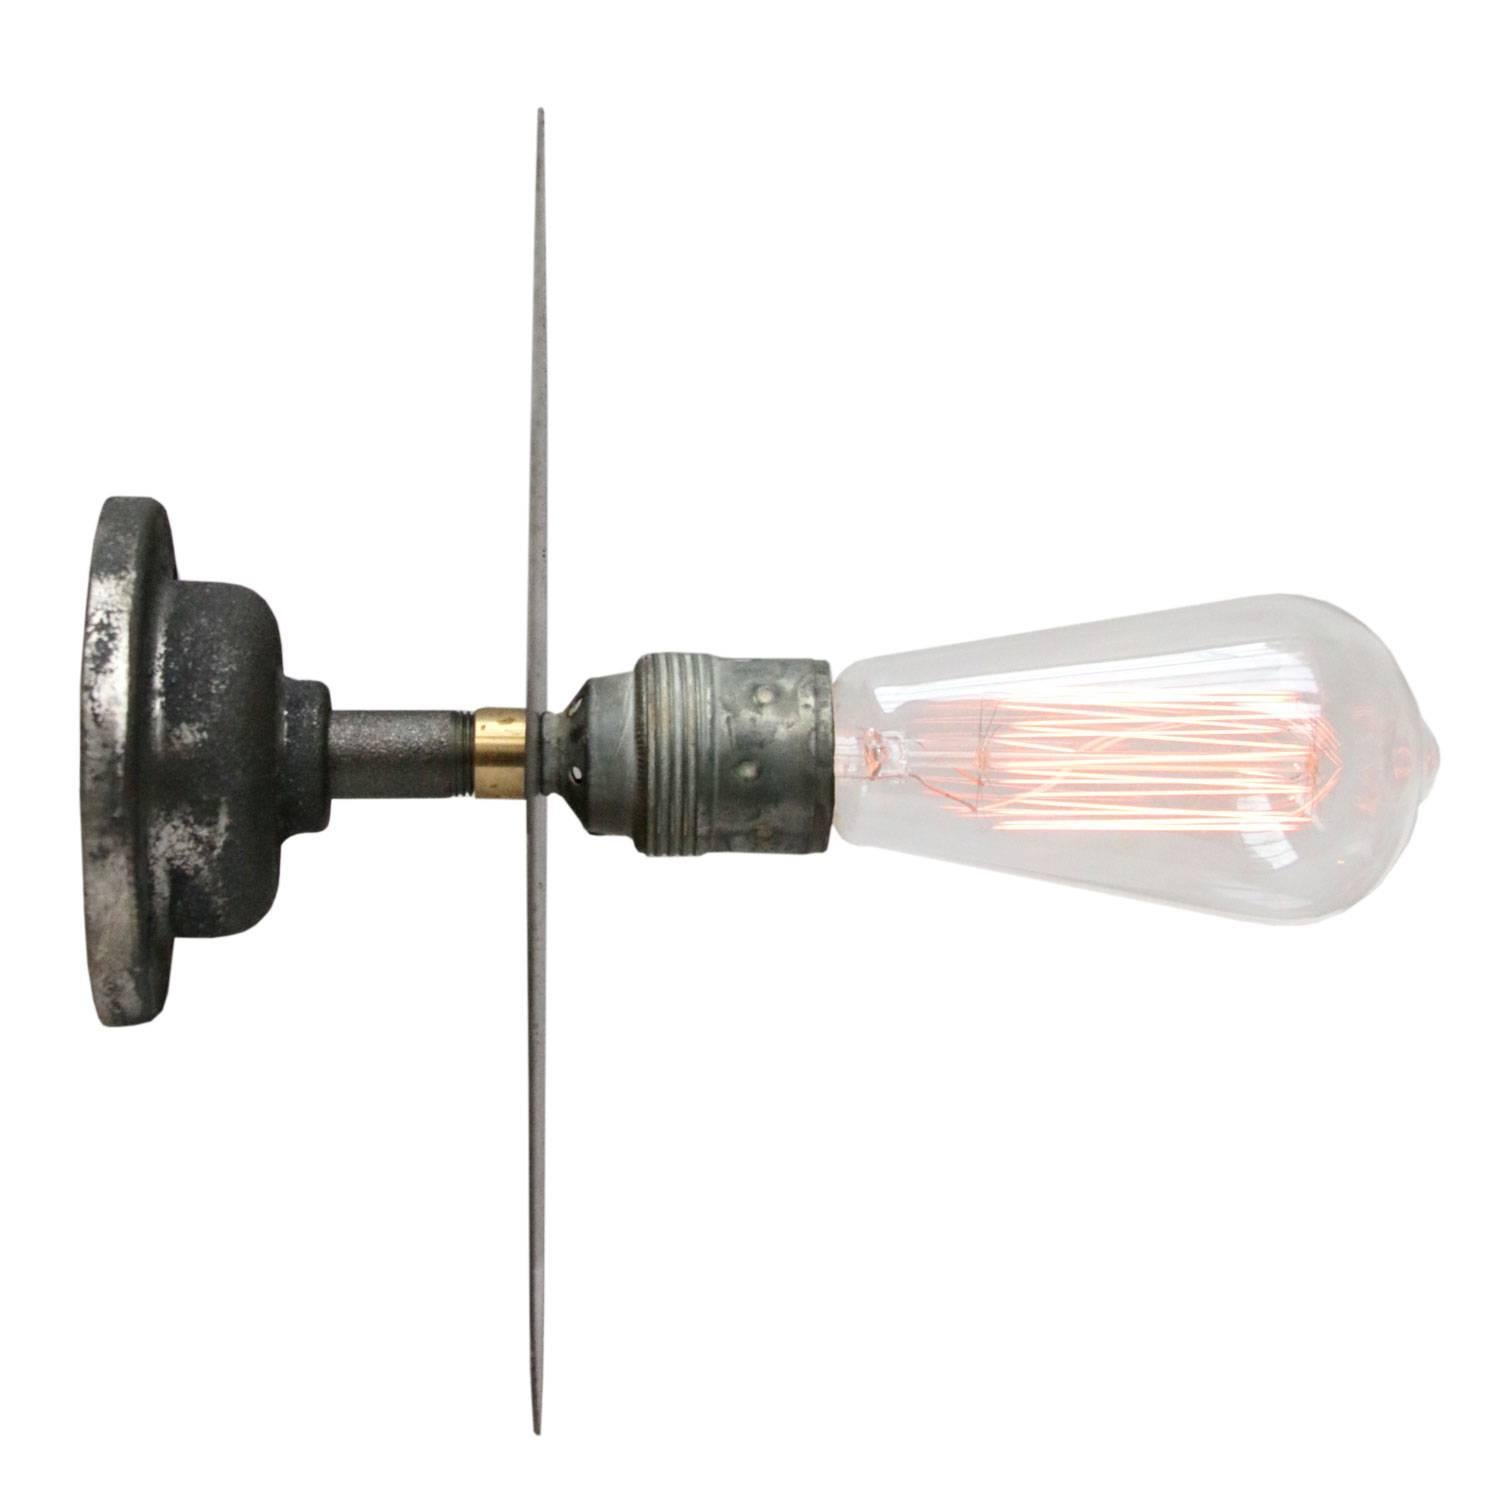 Metal wall lamp / scone.
Cast iron wall piece. Metal bulb holder with flat metal plate.

Weight: 0.8 kg / 1.8 lb

All lamps have been made suitable by international standards for incandescent light bulbs, energy-efficient and LED bulbs. E26/E27 bulb